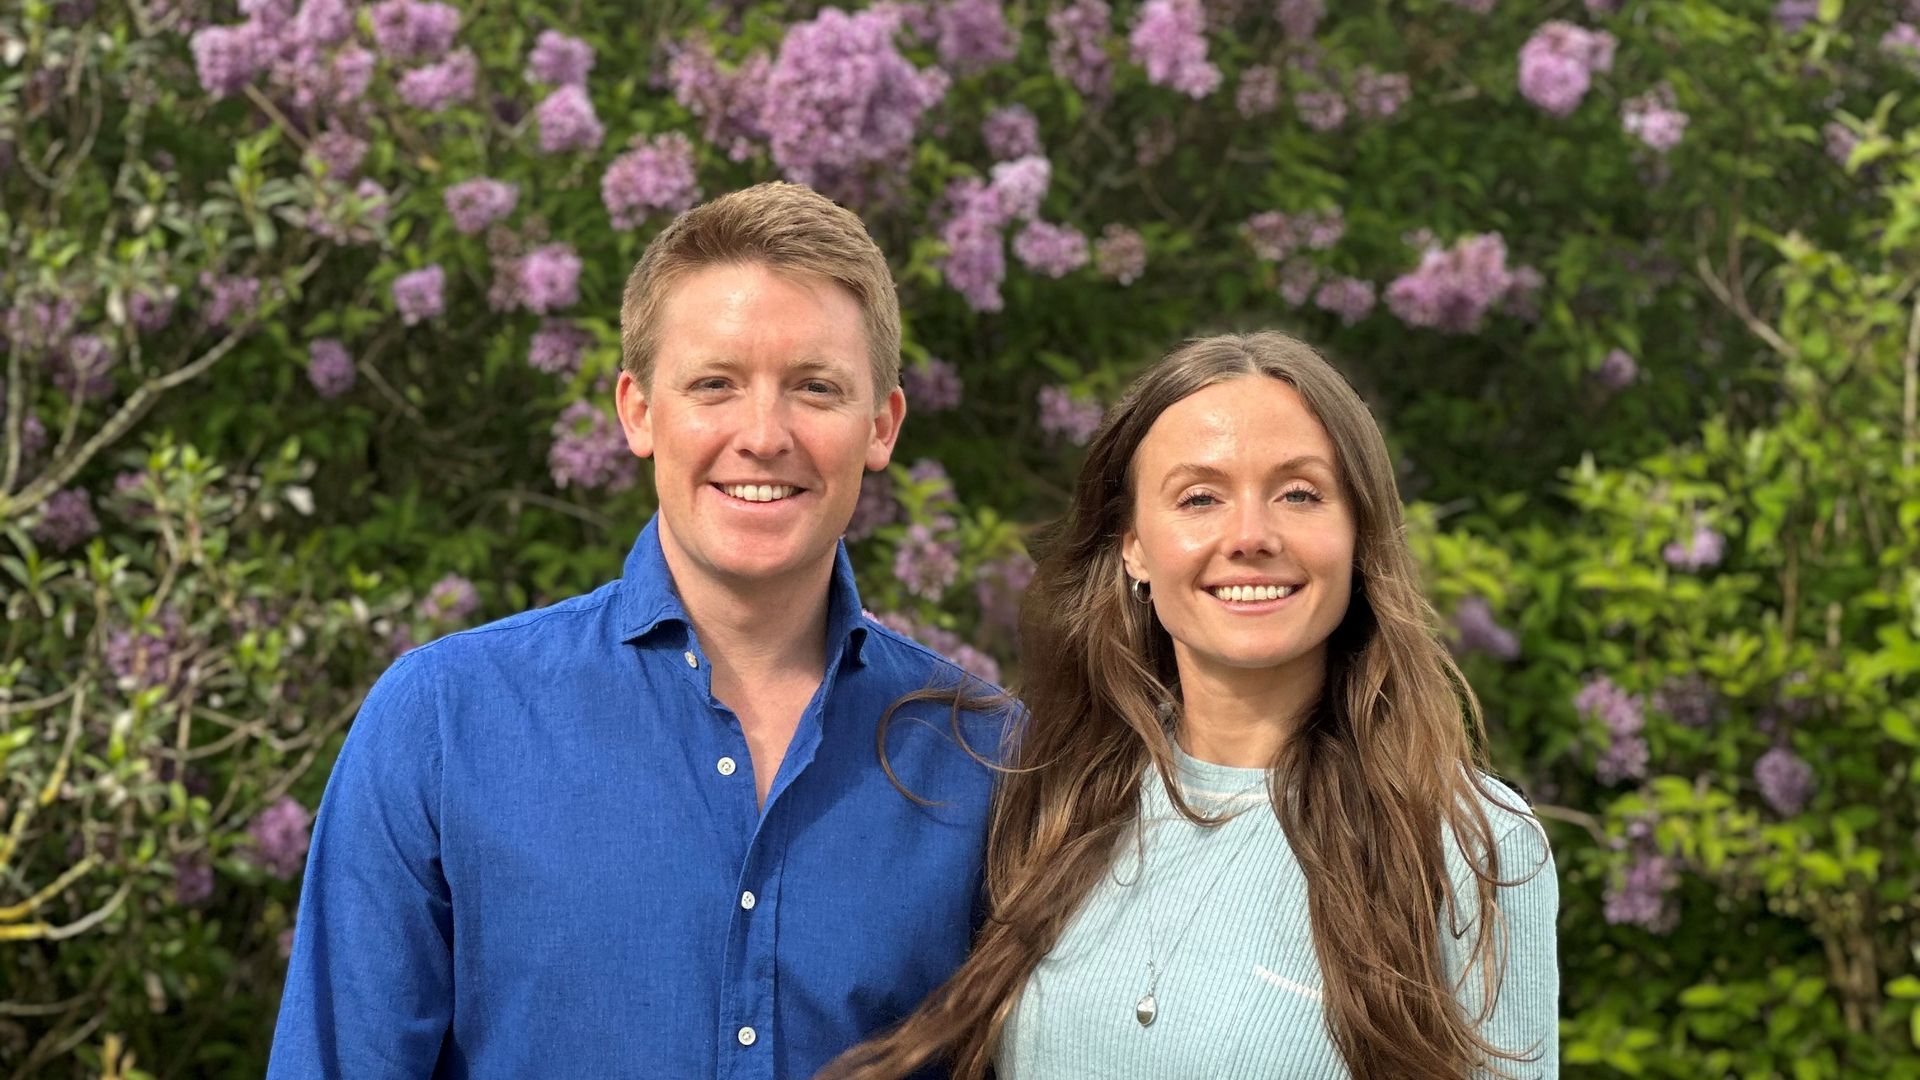 Prince George’s godfather Hugh Grosvenor will wed food ingredient company account manager Olivia Henson